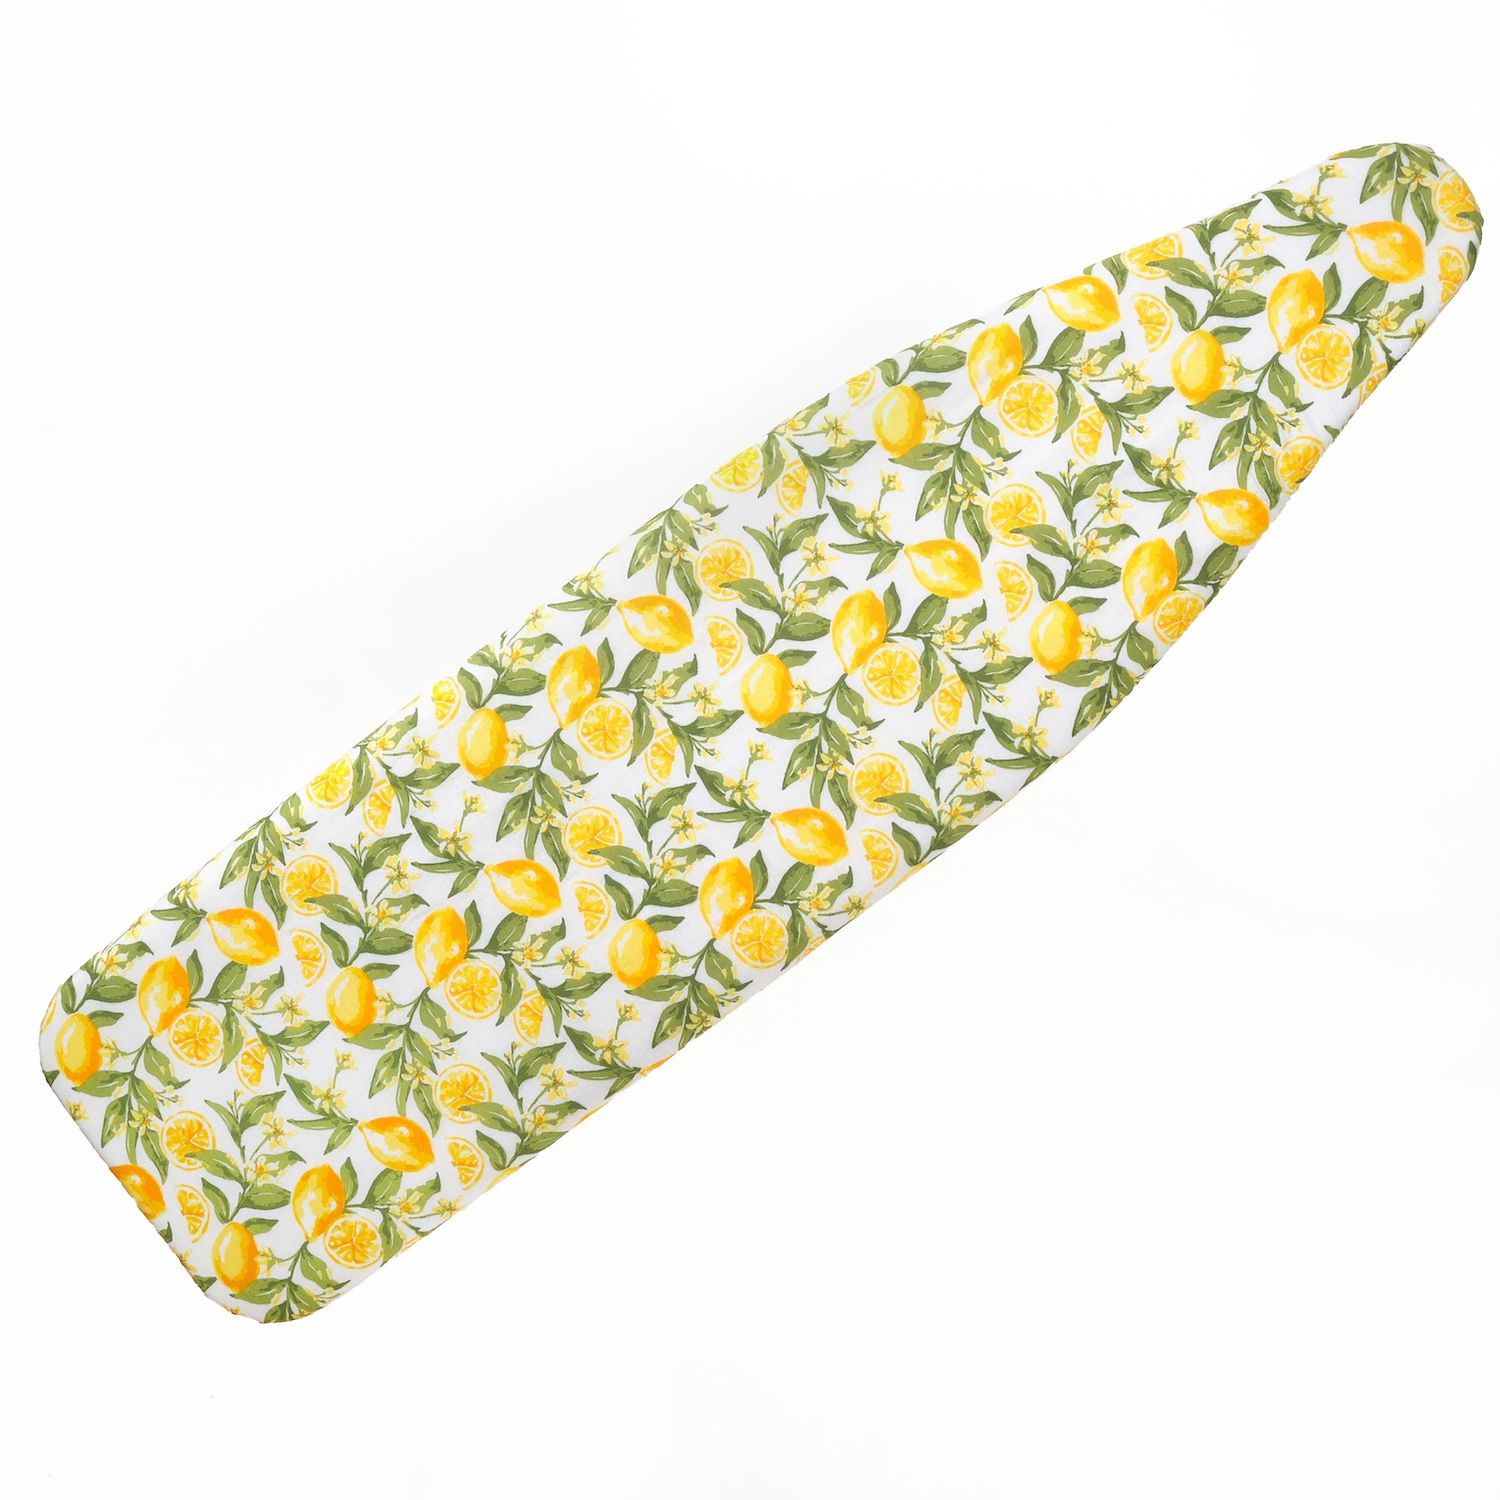  Snilety White Ironing Board Covers for Quilting Floral  Hummingbird Design Pad-Ironing Board Covers with Hook and Loop Fasteners  Easy Fit Ironing Board Cover : Home & Kitchen